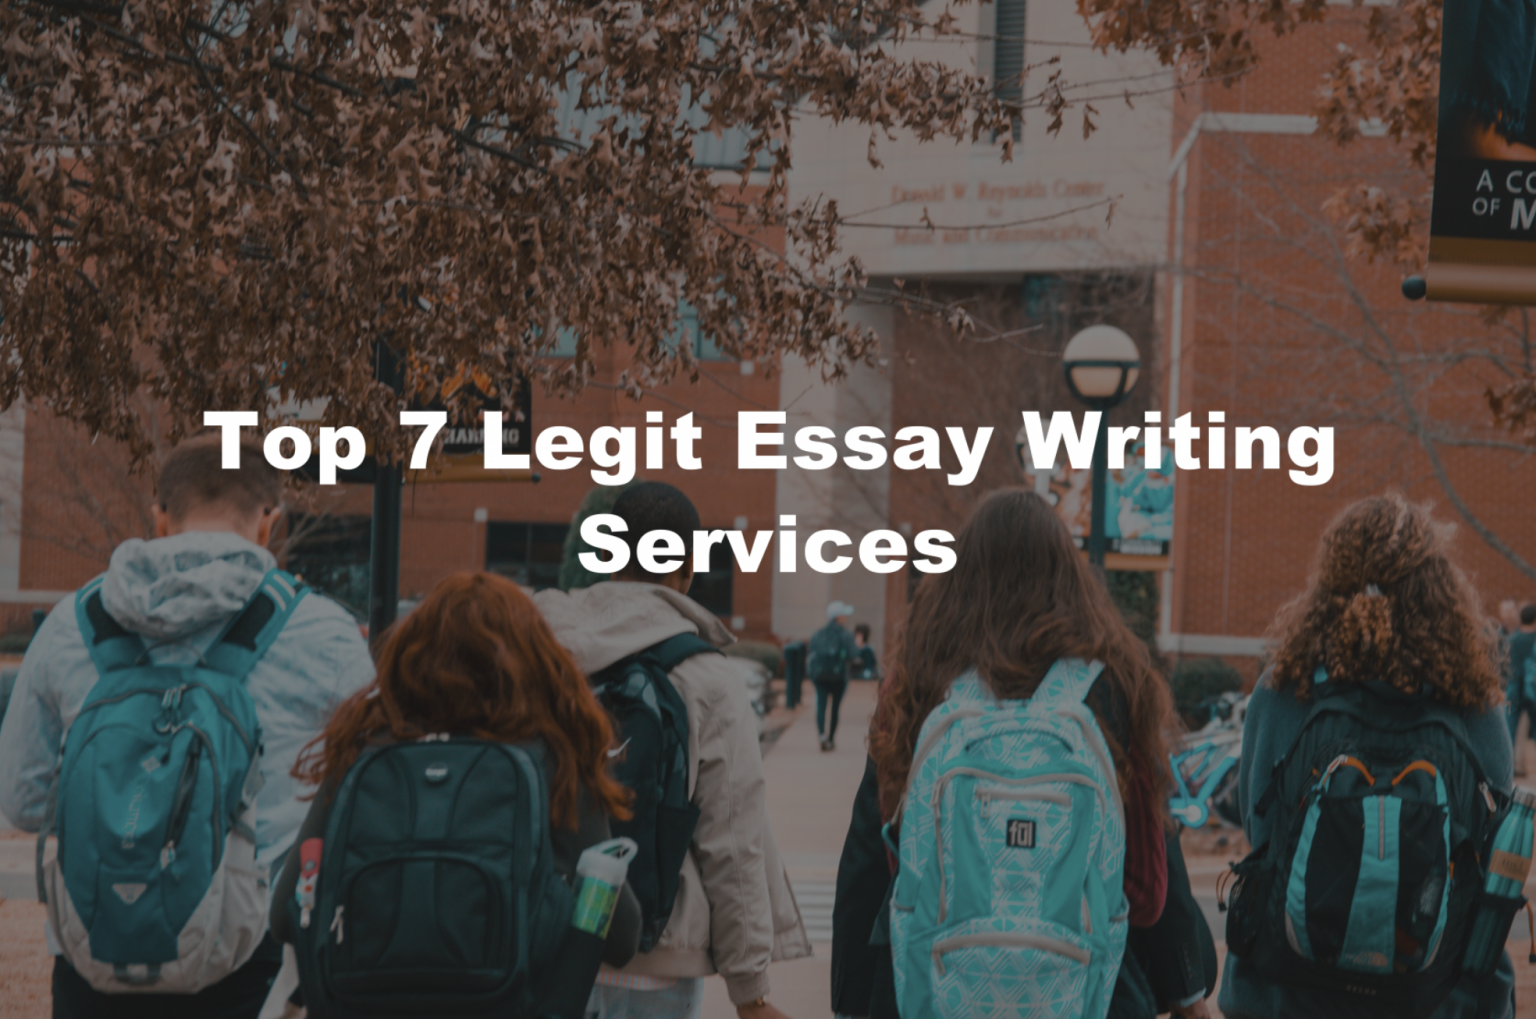 are there any legit essay writing services